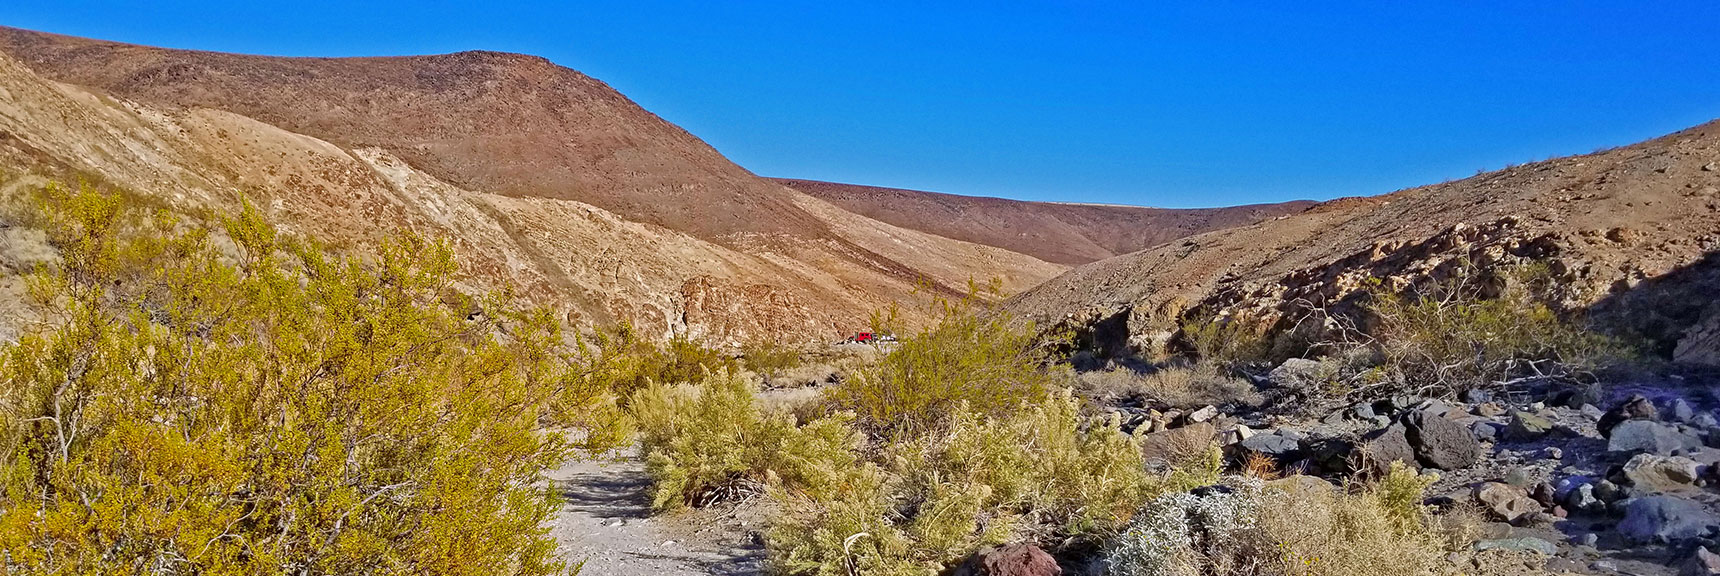 View Back Down the Canyon to the Trailhead. Note How the Vegetation Thins Out Below | Darwin Falls, Death Valley National Park, California